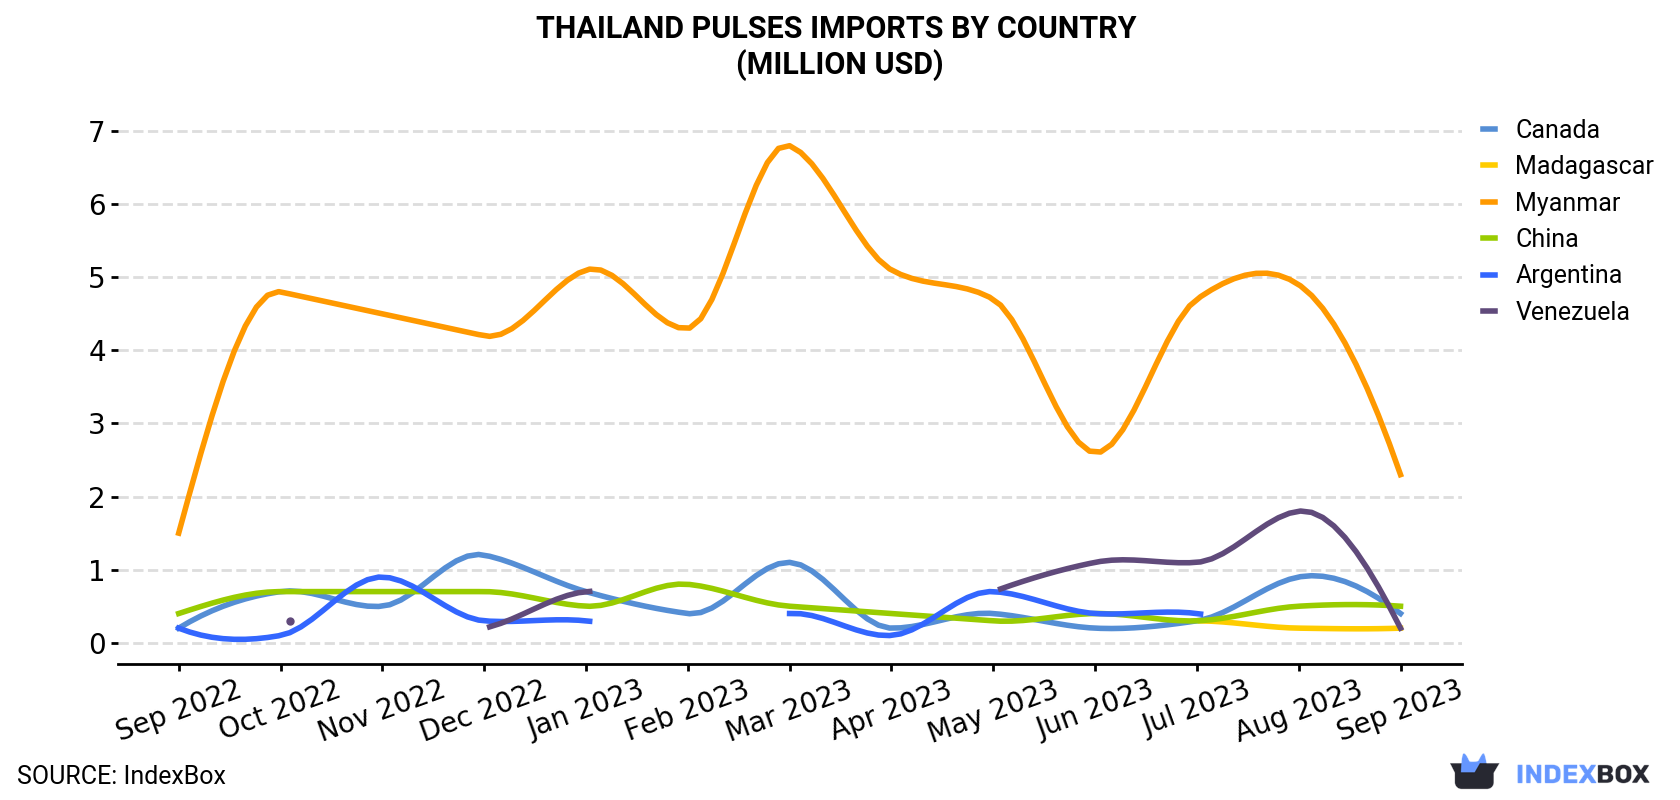 Thailand Pulses Imports By Country (Million USD)